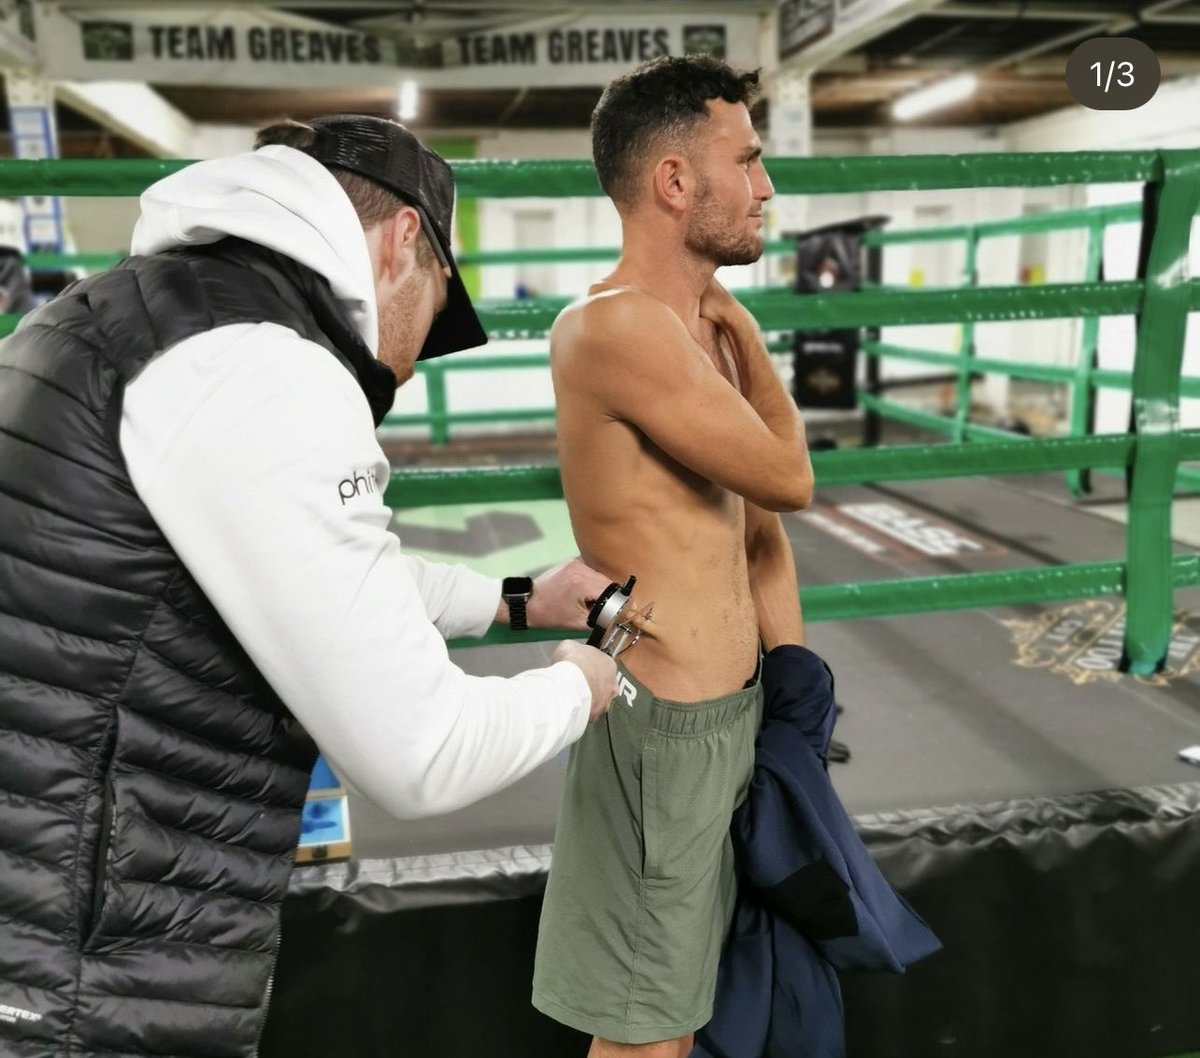 7 Days out to my official weigh in. Making weight comfortably in a career best shape. Leaner, Faster, Stronger. #ItsGomezTime #AndStill Saturday 13th April @ the @AOArena Live on @DAZNBoxing @MatchroomBoxing @KevinMaree @TeamGreaves #GomezJnr